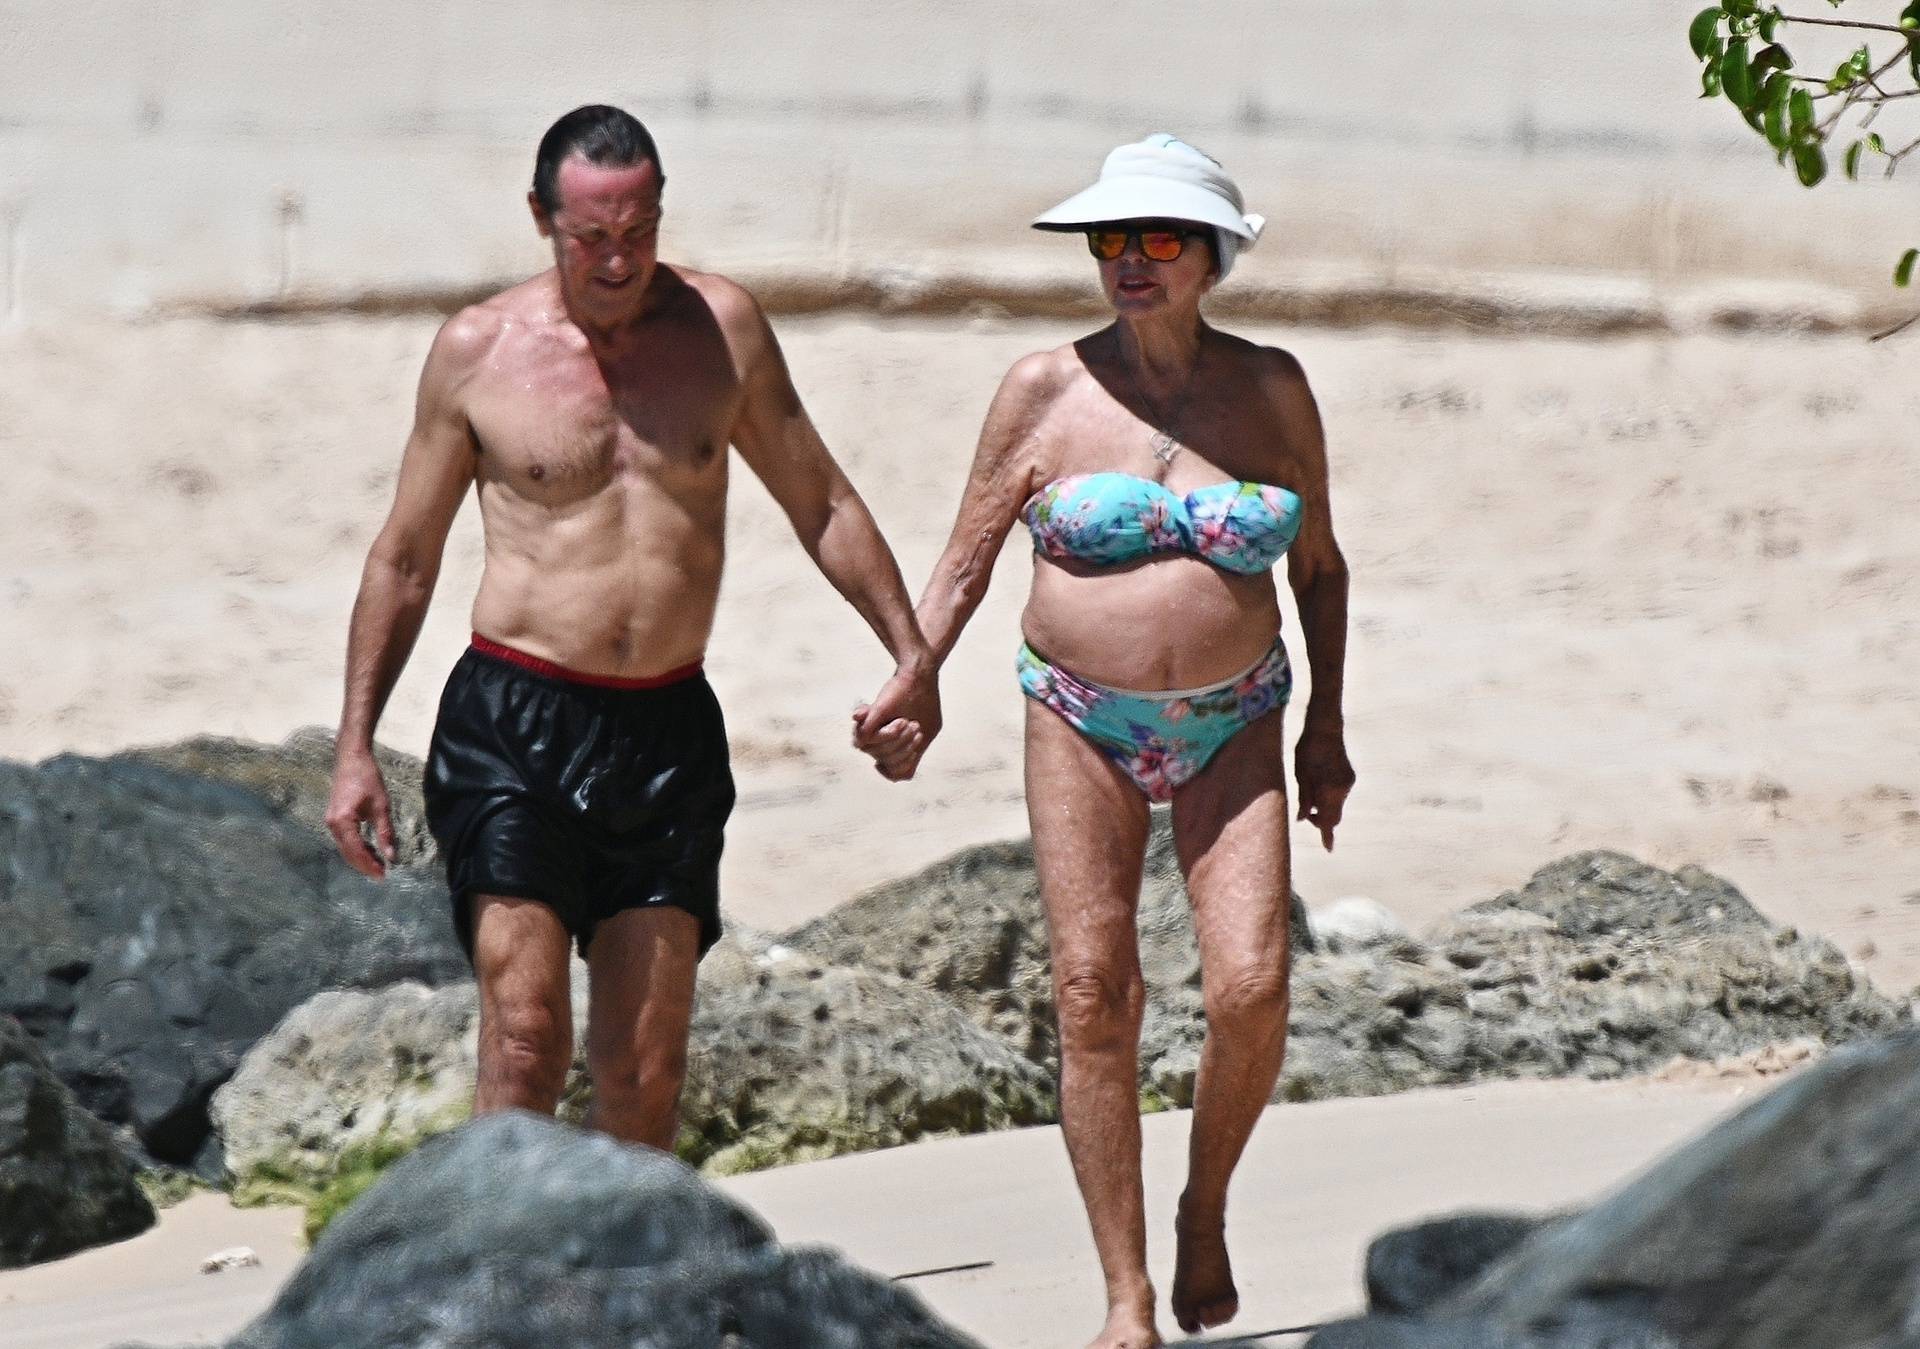 *PREMIUM-EXCLUSIVE* *MUST CALL FOR PRICING* The British Actress, 90-year-old Joan Collins and her husband Percy Gibson enjoy an affectionate stroll as they held hands at the beach on their Caribbean getaway in Western Barbados.*PICTURES TAKEN ON 31/10/20